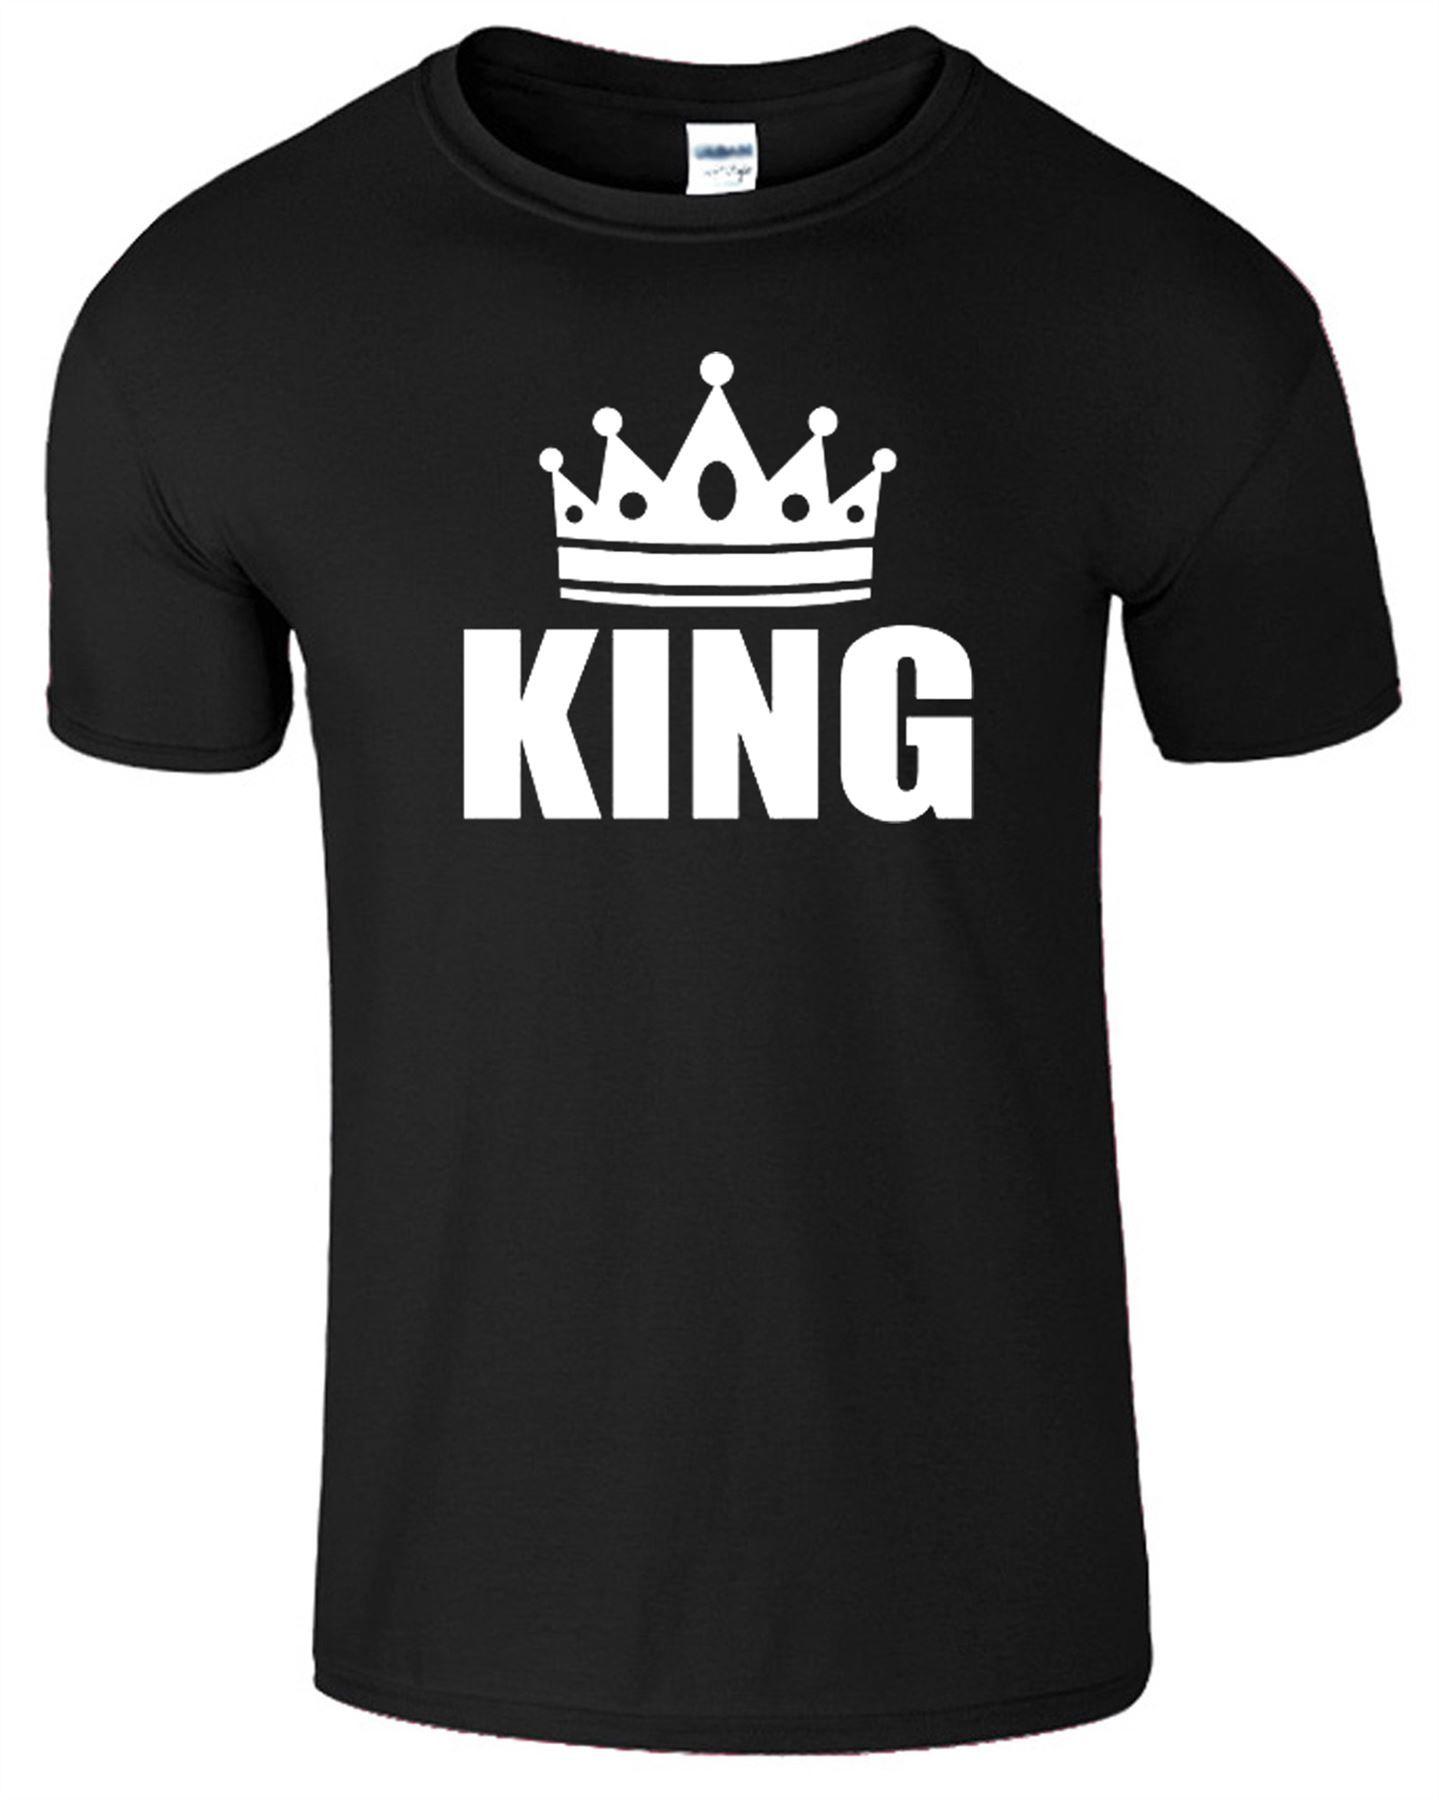 King and Queen Crown Logo - King And Queen T Shirt Mens Womens Crown Logo Romantic Couple Top ...